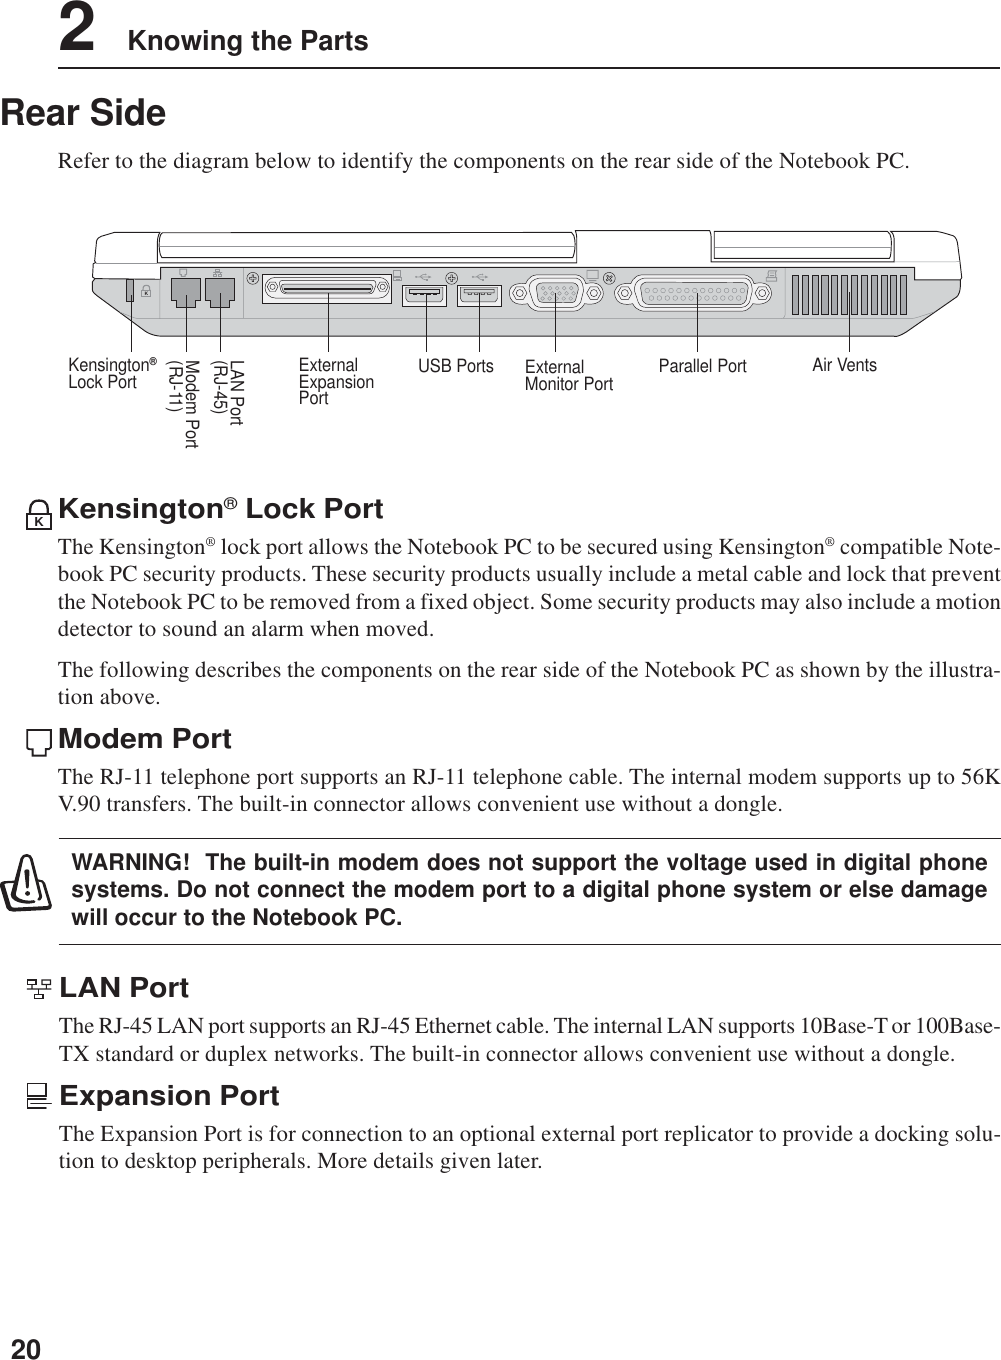 202    Knowing the PartsRear SideRefer to the diagram below to identify the components on the rear side of the Notebook PC.Kensington® Lock PortThe Kensington® lock port allows the Notebook PC to be secured using Kensington® compatible Note-book PC security products. These security products usually include a metal cable and lock that preventthe Notebook PC to be removed from a fixed object. Some security products may also include a motiondetector to sound an alarm when moved.The following describes the components on the rear side of the Notebook PC as shown by the illustra-tion above.Modem PortThe RJ-11 telephone port supports an RJ-11 telephone cable. The internal modem supports up to 56KV.90 transfers. The built-in connector allows convenient use without a dongle.KModem Port(RJ-11)LAN Port(RJ-45)ExternalMonitor Port Air VentsUSB PortsExternalExpansionPortParallel PortKensington®Lock PortKLAN PortThe RJ-45 LAN port supports an RJ-45 Ethernet cable. The internal LAN supports 10Base-T or 100Base-TX standard or duplex networks. The built-in connector allows convenient use without a dongle.Expansion PortThe Expansion Port is for connection to an optional external port replicator to provide a docking solu-tion to desktop peripherals. More details given later.WARNING!  The built-in modem does not support the voltage used in digital phonesystems. Do not connect the modem port to a digital phone system or else damagewill occur to the Notebook PC.